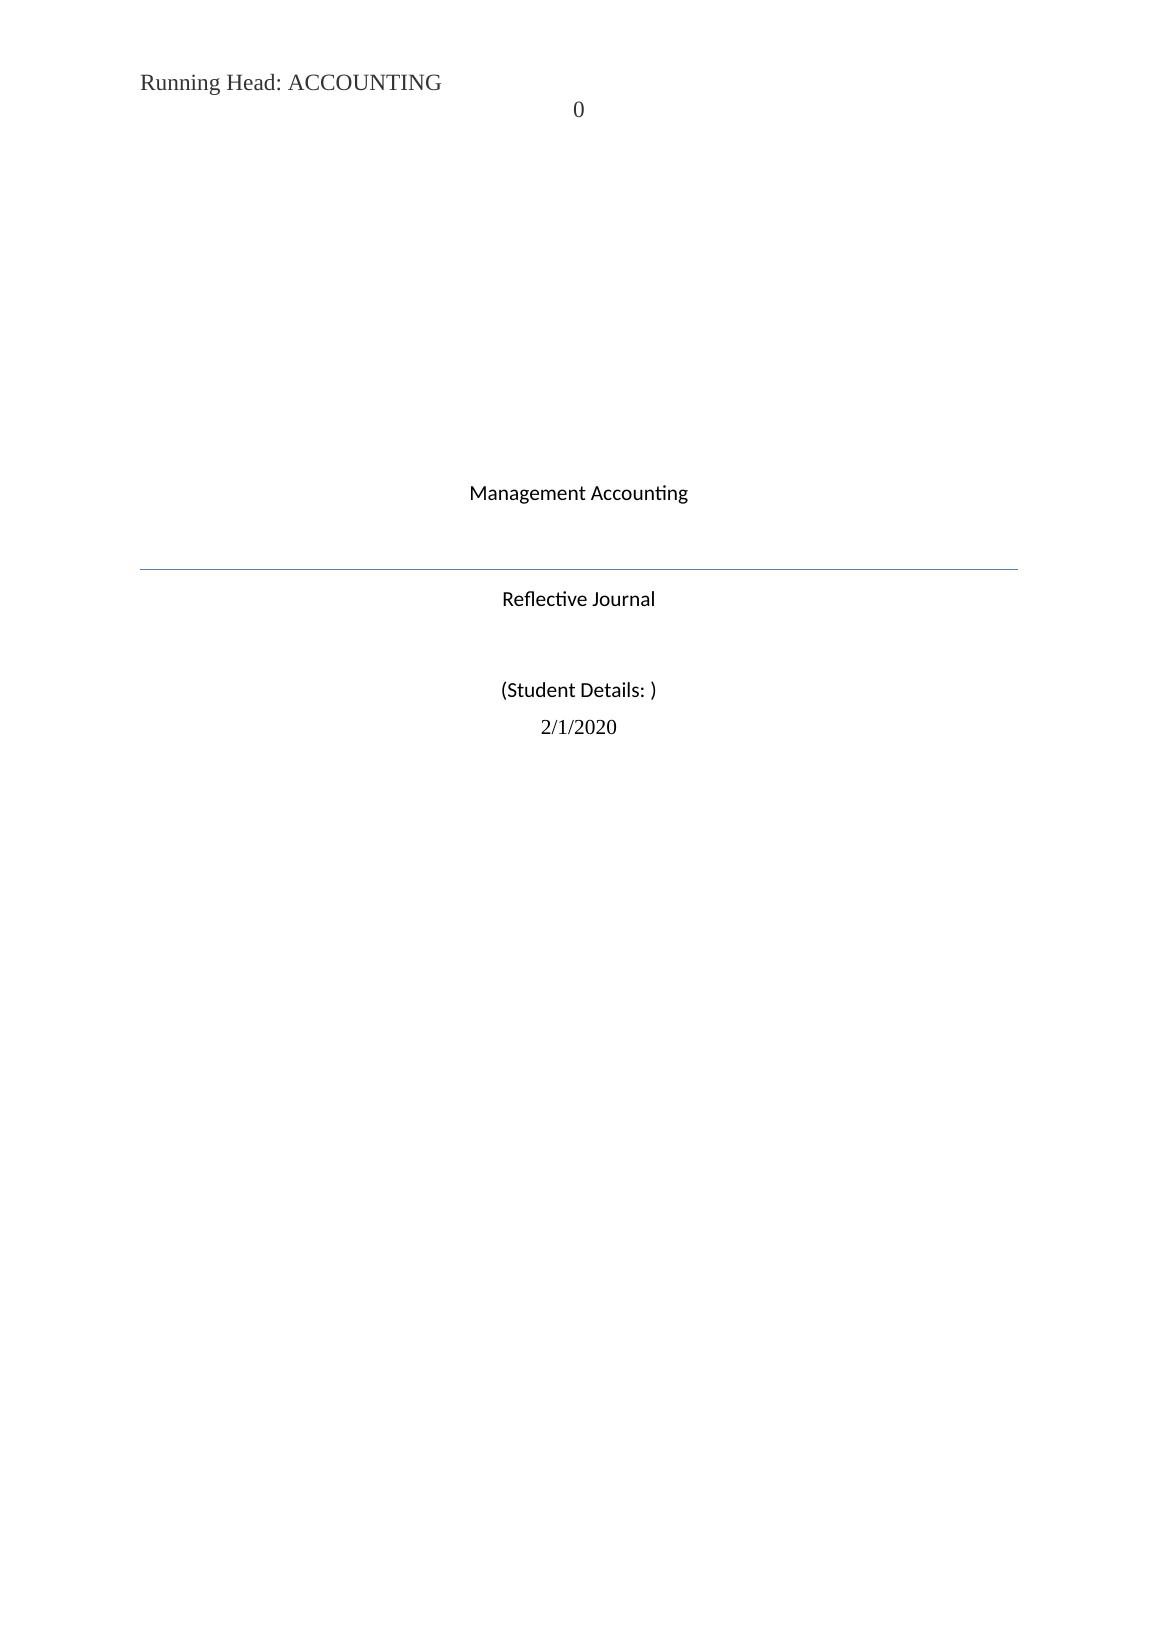 Reflective Journal of Management Accounting_1